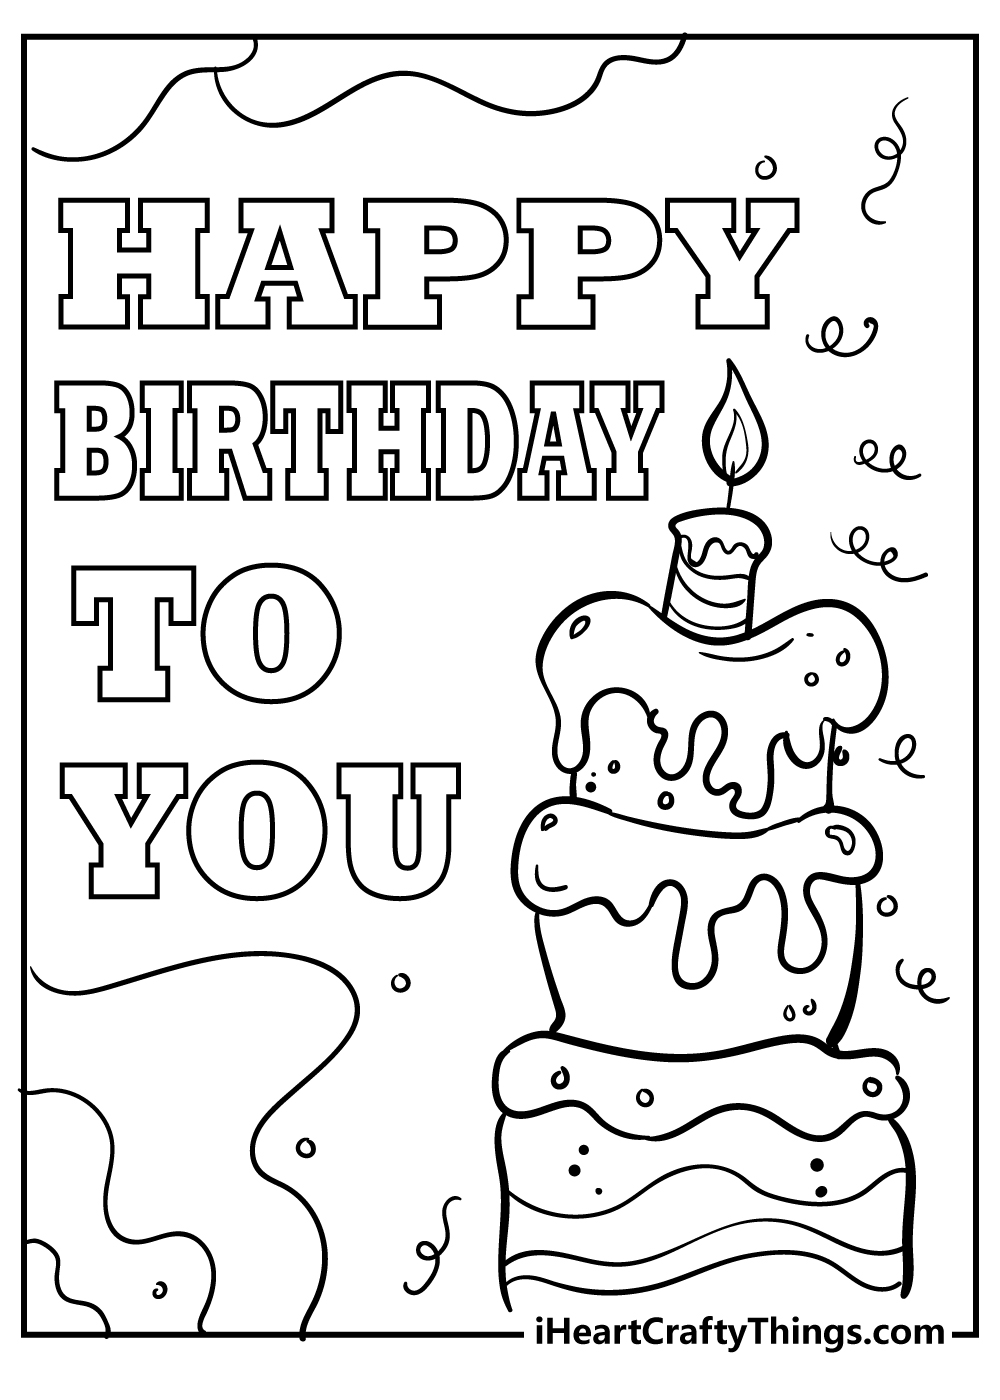 Free Printable Birthday Cards Coloring